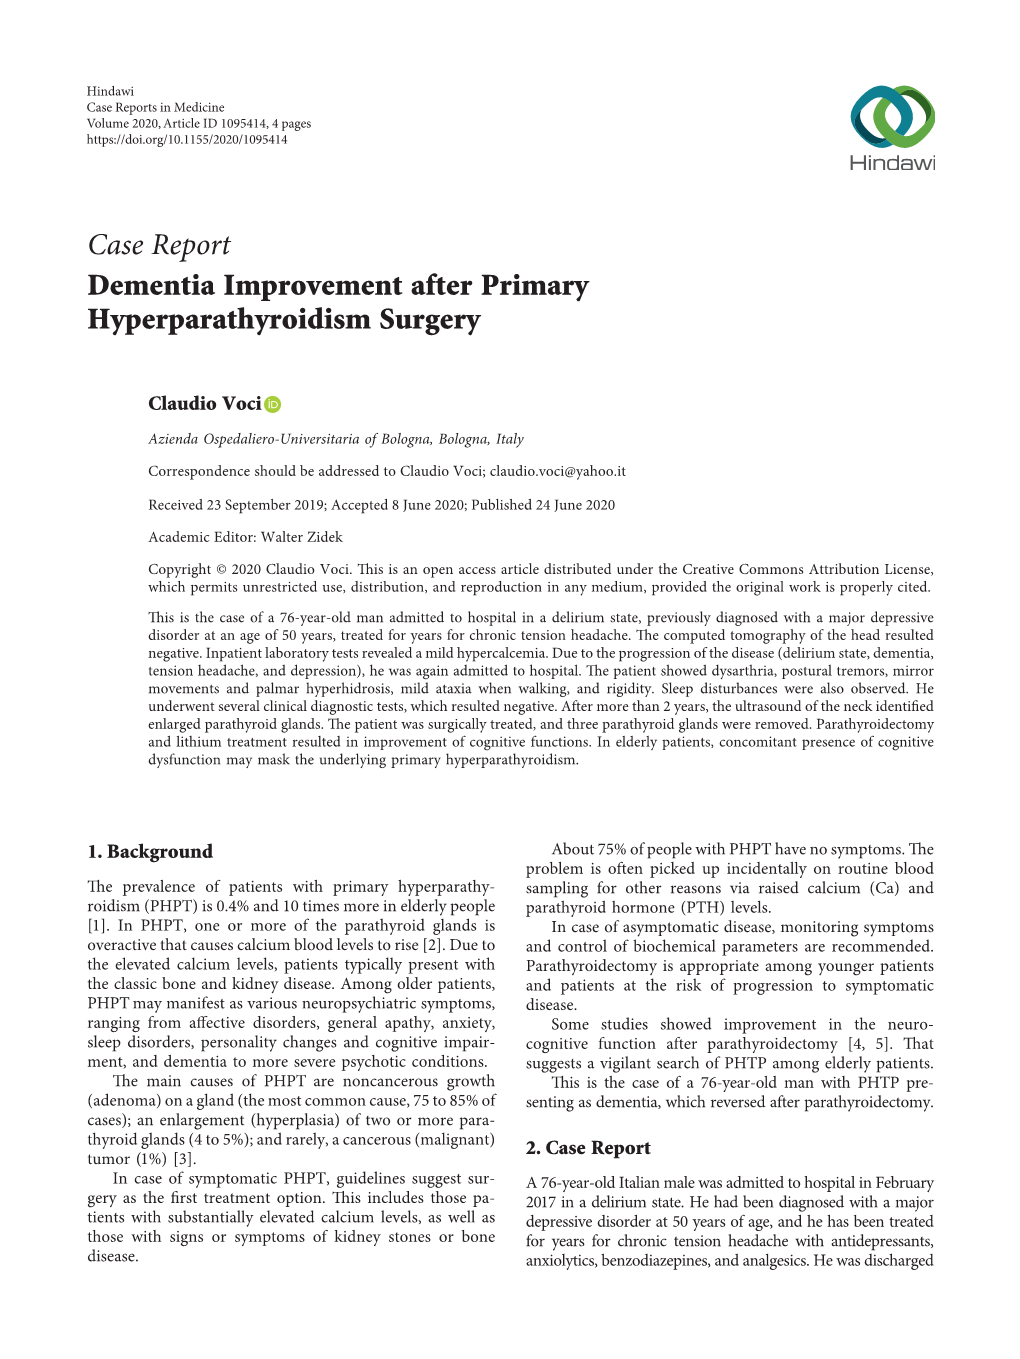 Dementia Improvement After Primary Hyperparathyroidism Surgery